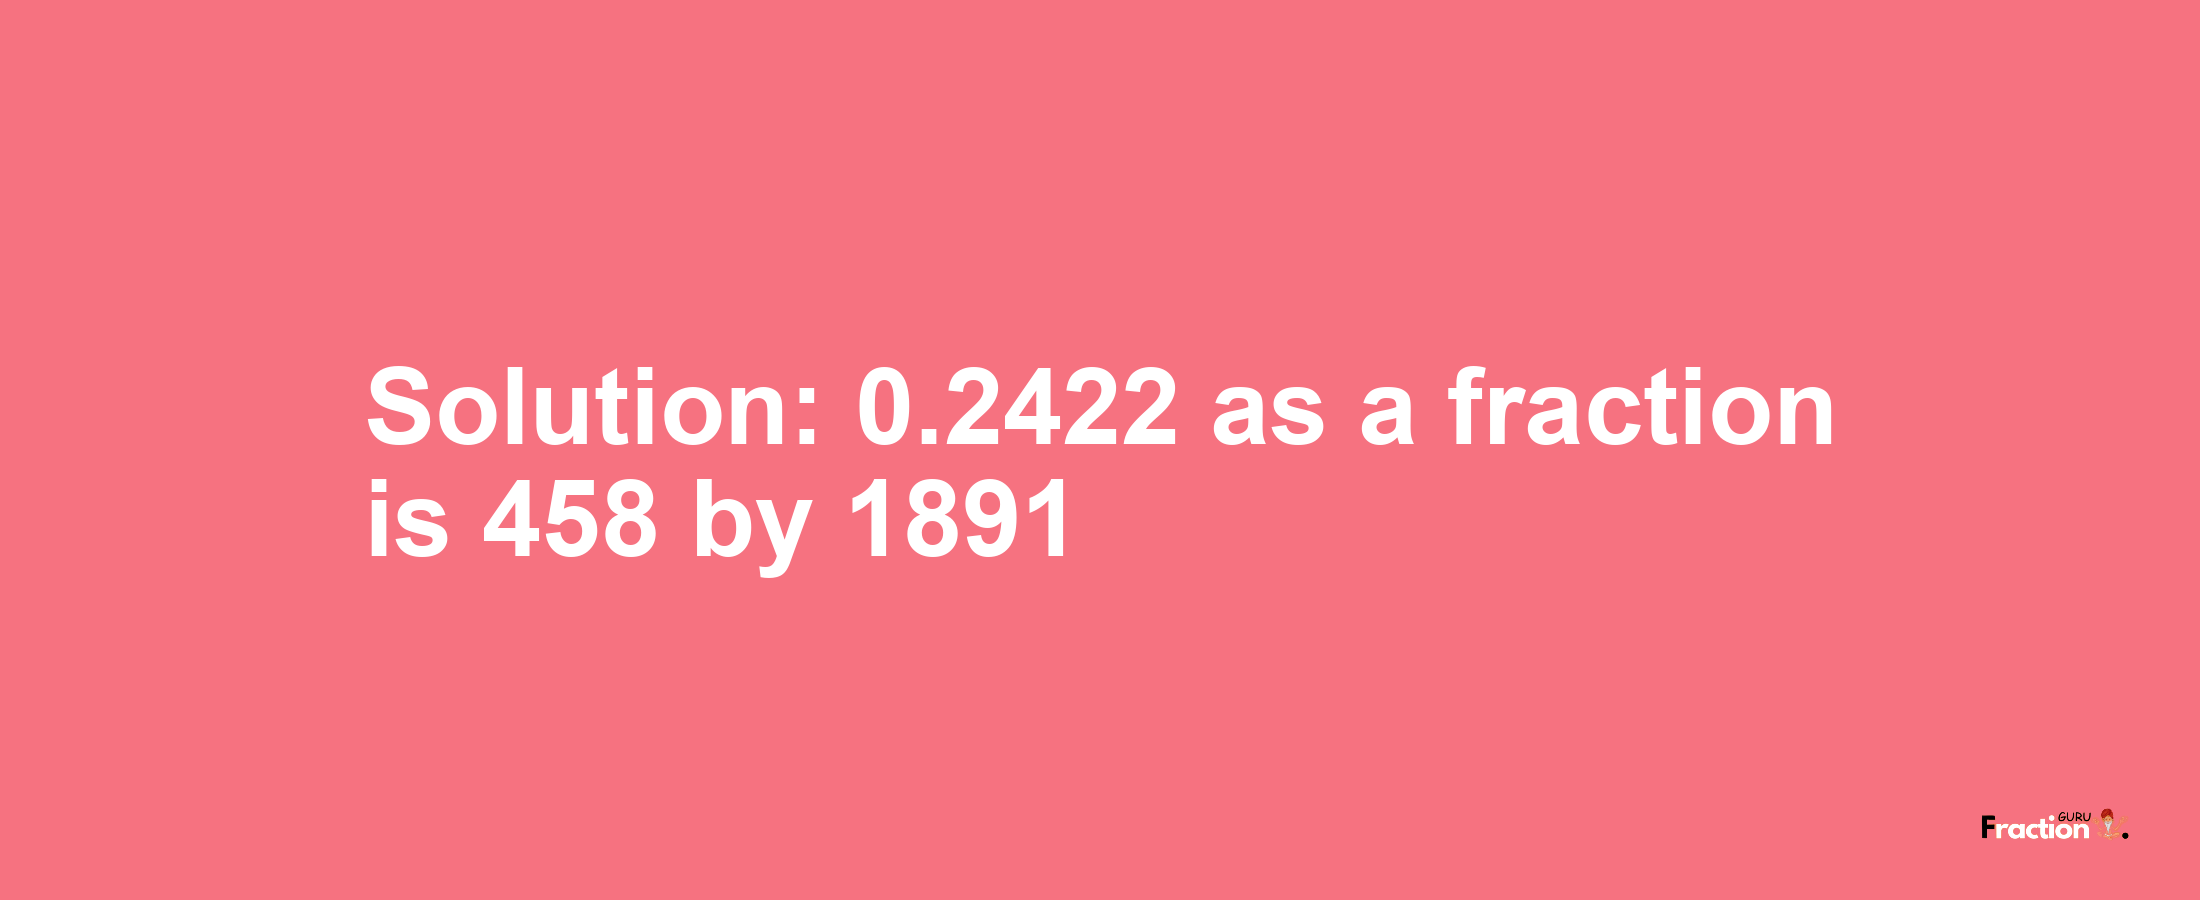 Solution:0.2422 as a fraction is 458/1891